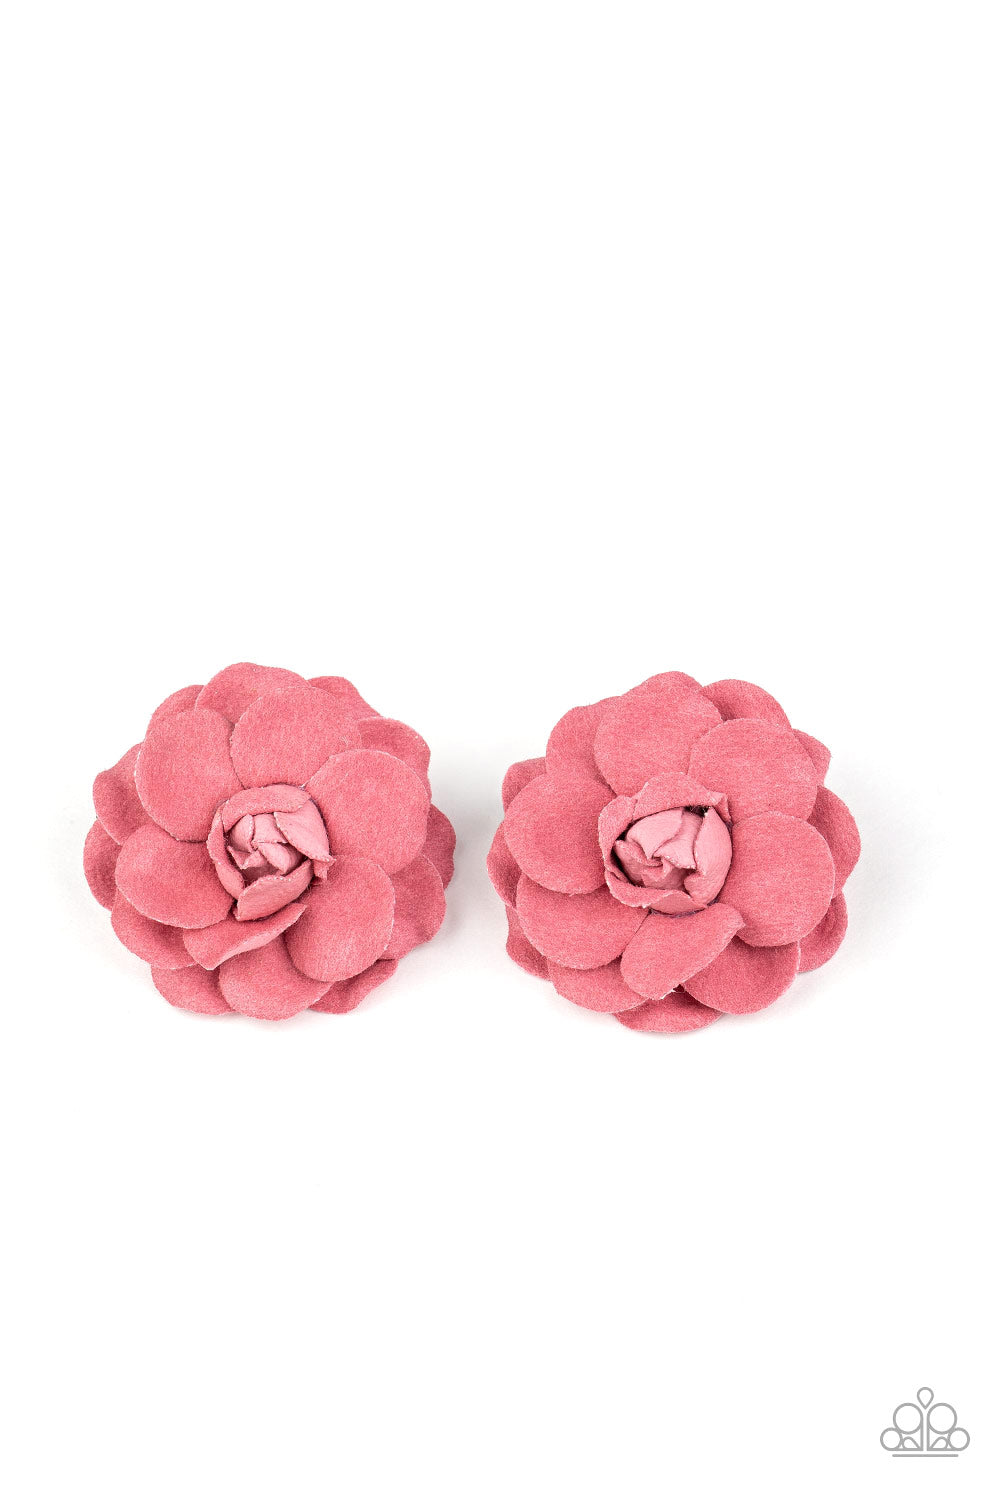 &lt;P&gt;Pink felt-like petals delicately gather into a dainty pair of rosebuds for a colorfully charming fashion. Each flower features a standard hair clip on the back.&lt;/P&gt;

&lt;P&gt;&lt;I&gt;Sold as one pair of hair clips.&lt;/I&gt;&lt;/P&gt;


&lt;img src=\&quot;https://d9b54x484lq62.cloudfront.net/paparazzi/shopping/images/517_tag150x115_1.png\&quot; alt=\&quot;New Kit\&quot; align=\&quot;middle\&quot; height=\&quot;50\&quot; width=\&quot;50\&quot;/&gt;